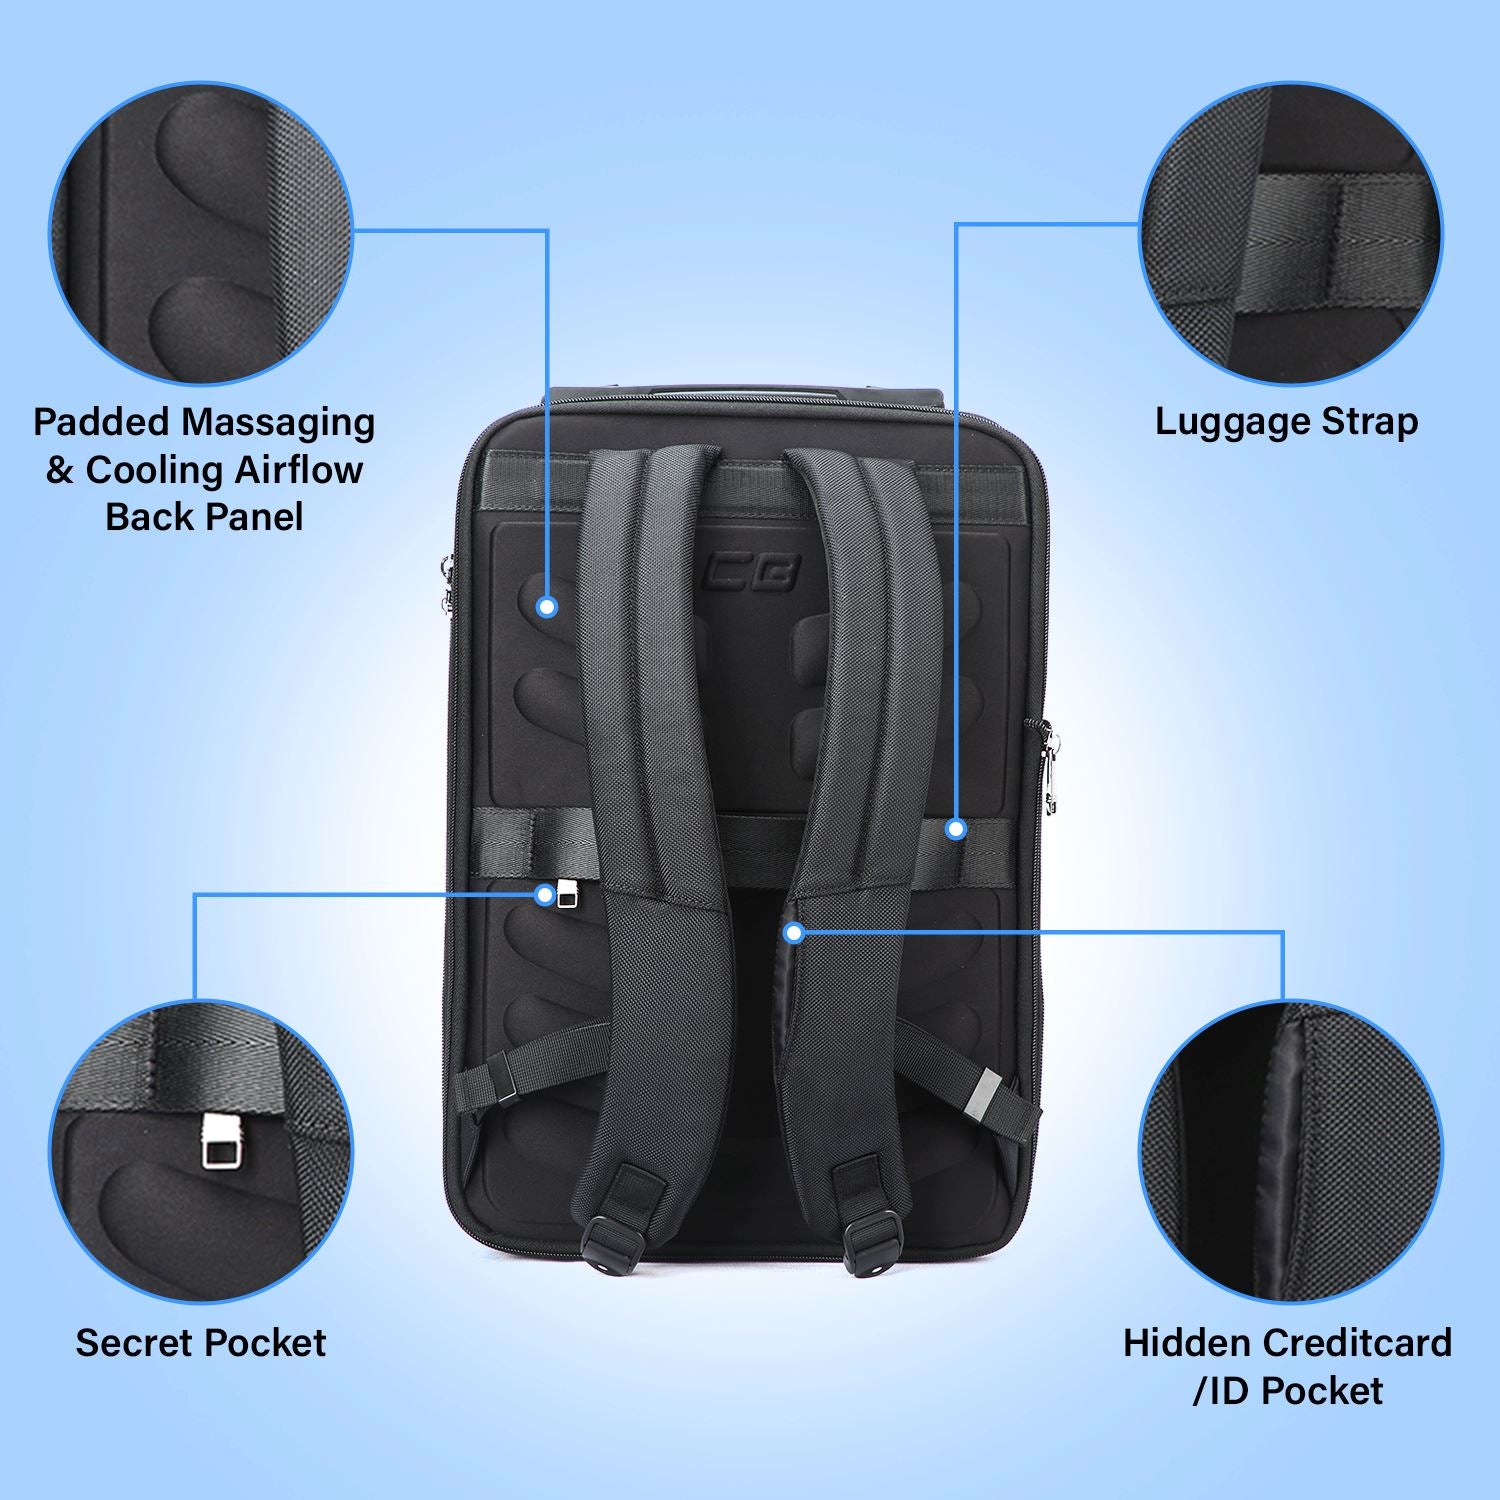 The CyberBackPack: Camping Vs. Traveling (Pros & Cons)